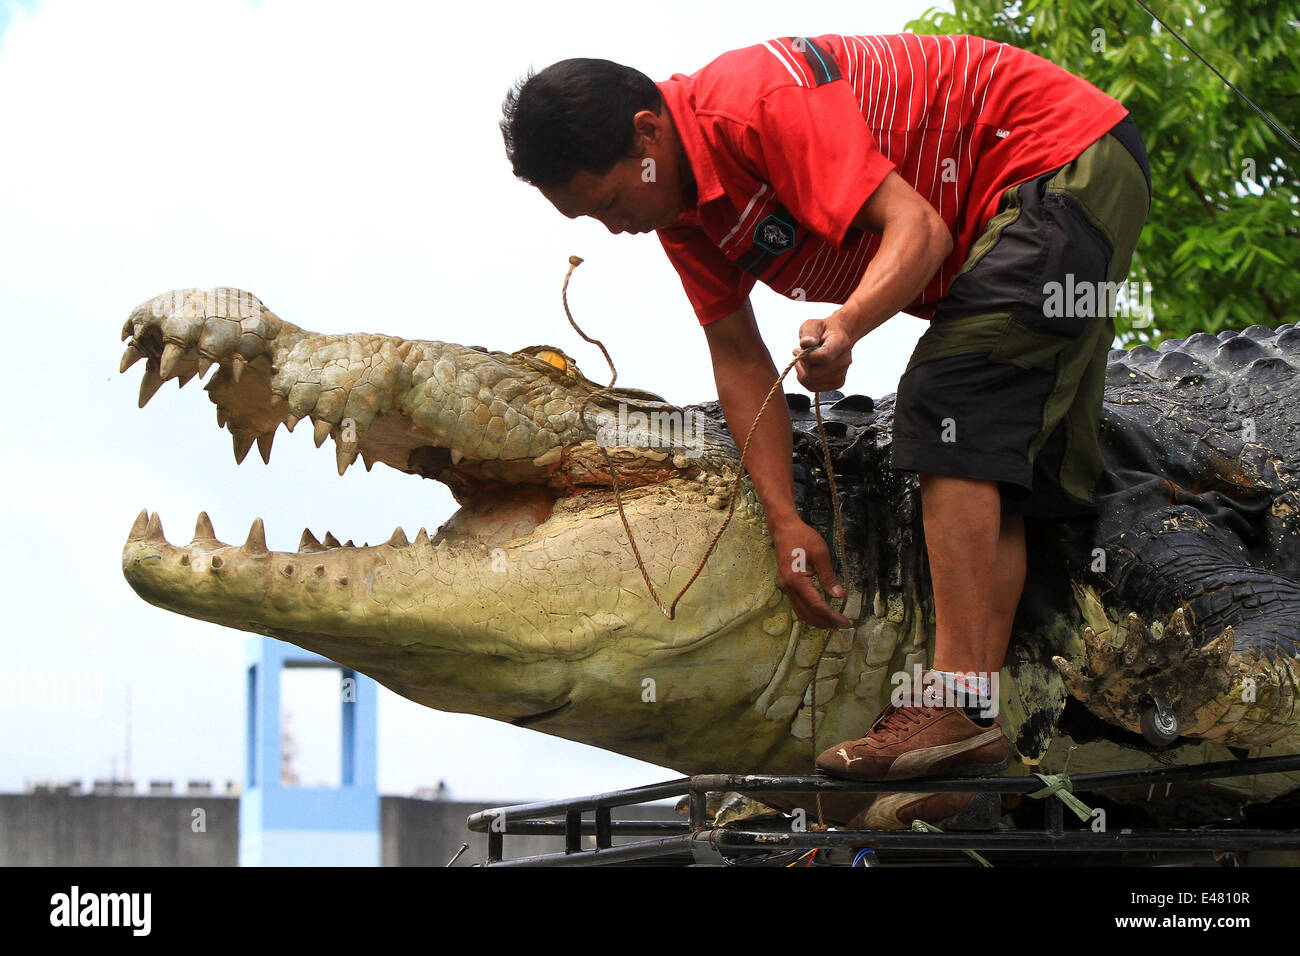 Pasay City, Philippines. 5th July, 2014. A worker unloads "Longlong", a  21-foot robot crocodile from a truck at the Crocodile Park in Pasay City,  the Philippines, July 5, 2014. The robot crocodile,